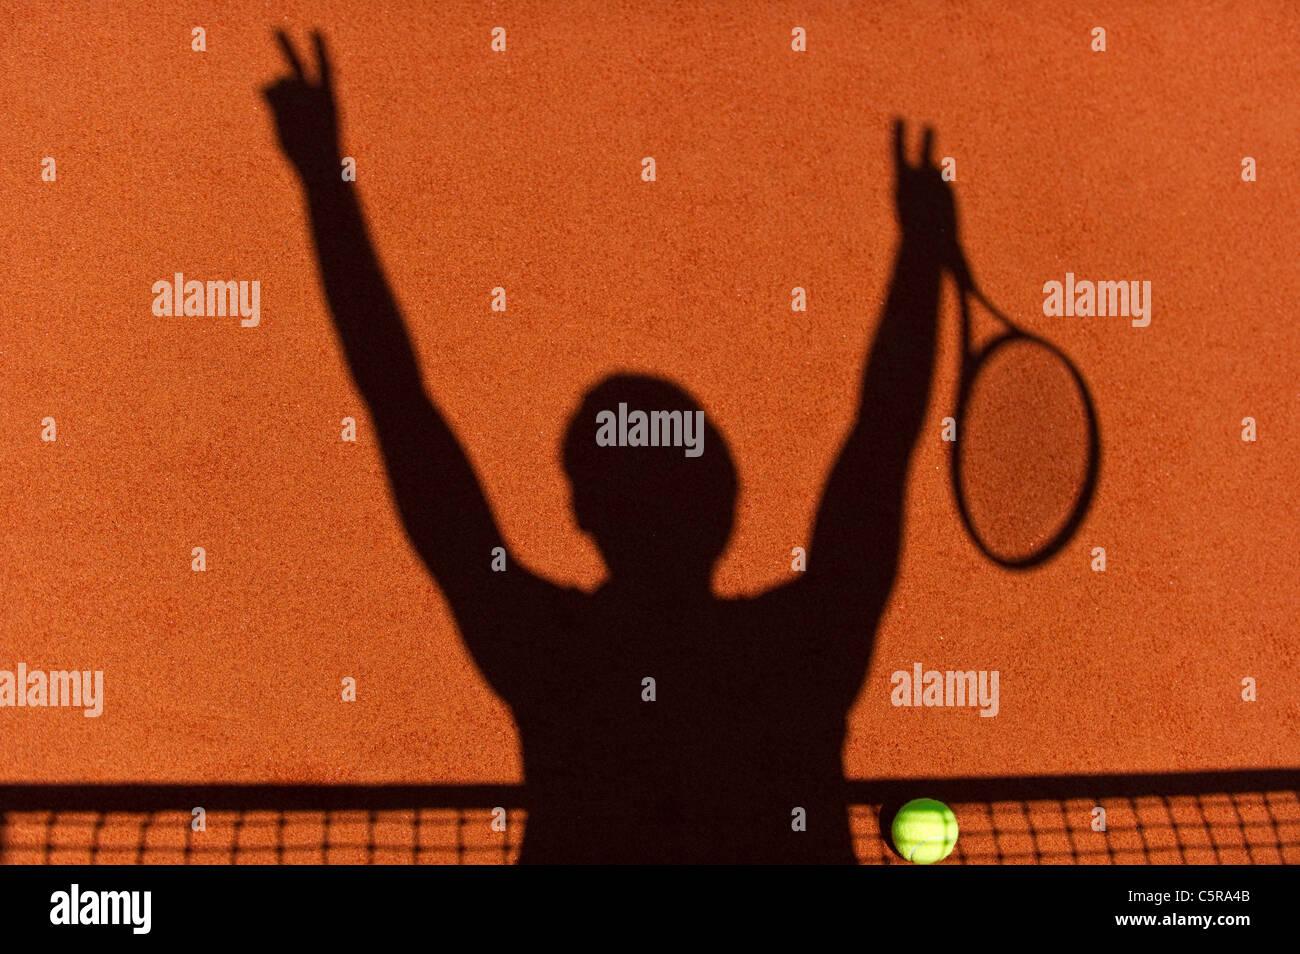 A tennis players silhouette at the net celebrates victory with tennis ball on court. Stock Photo